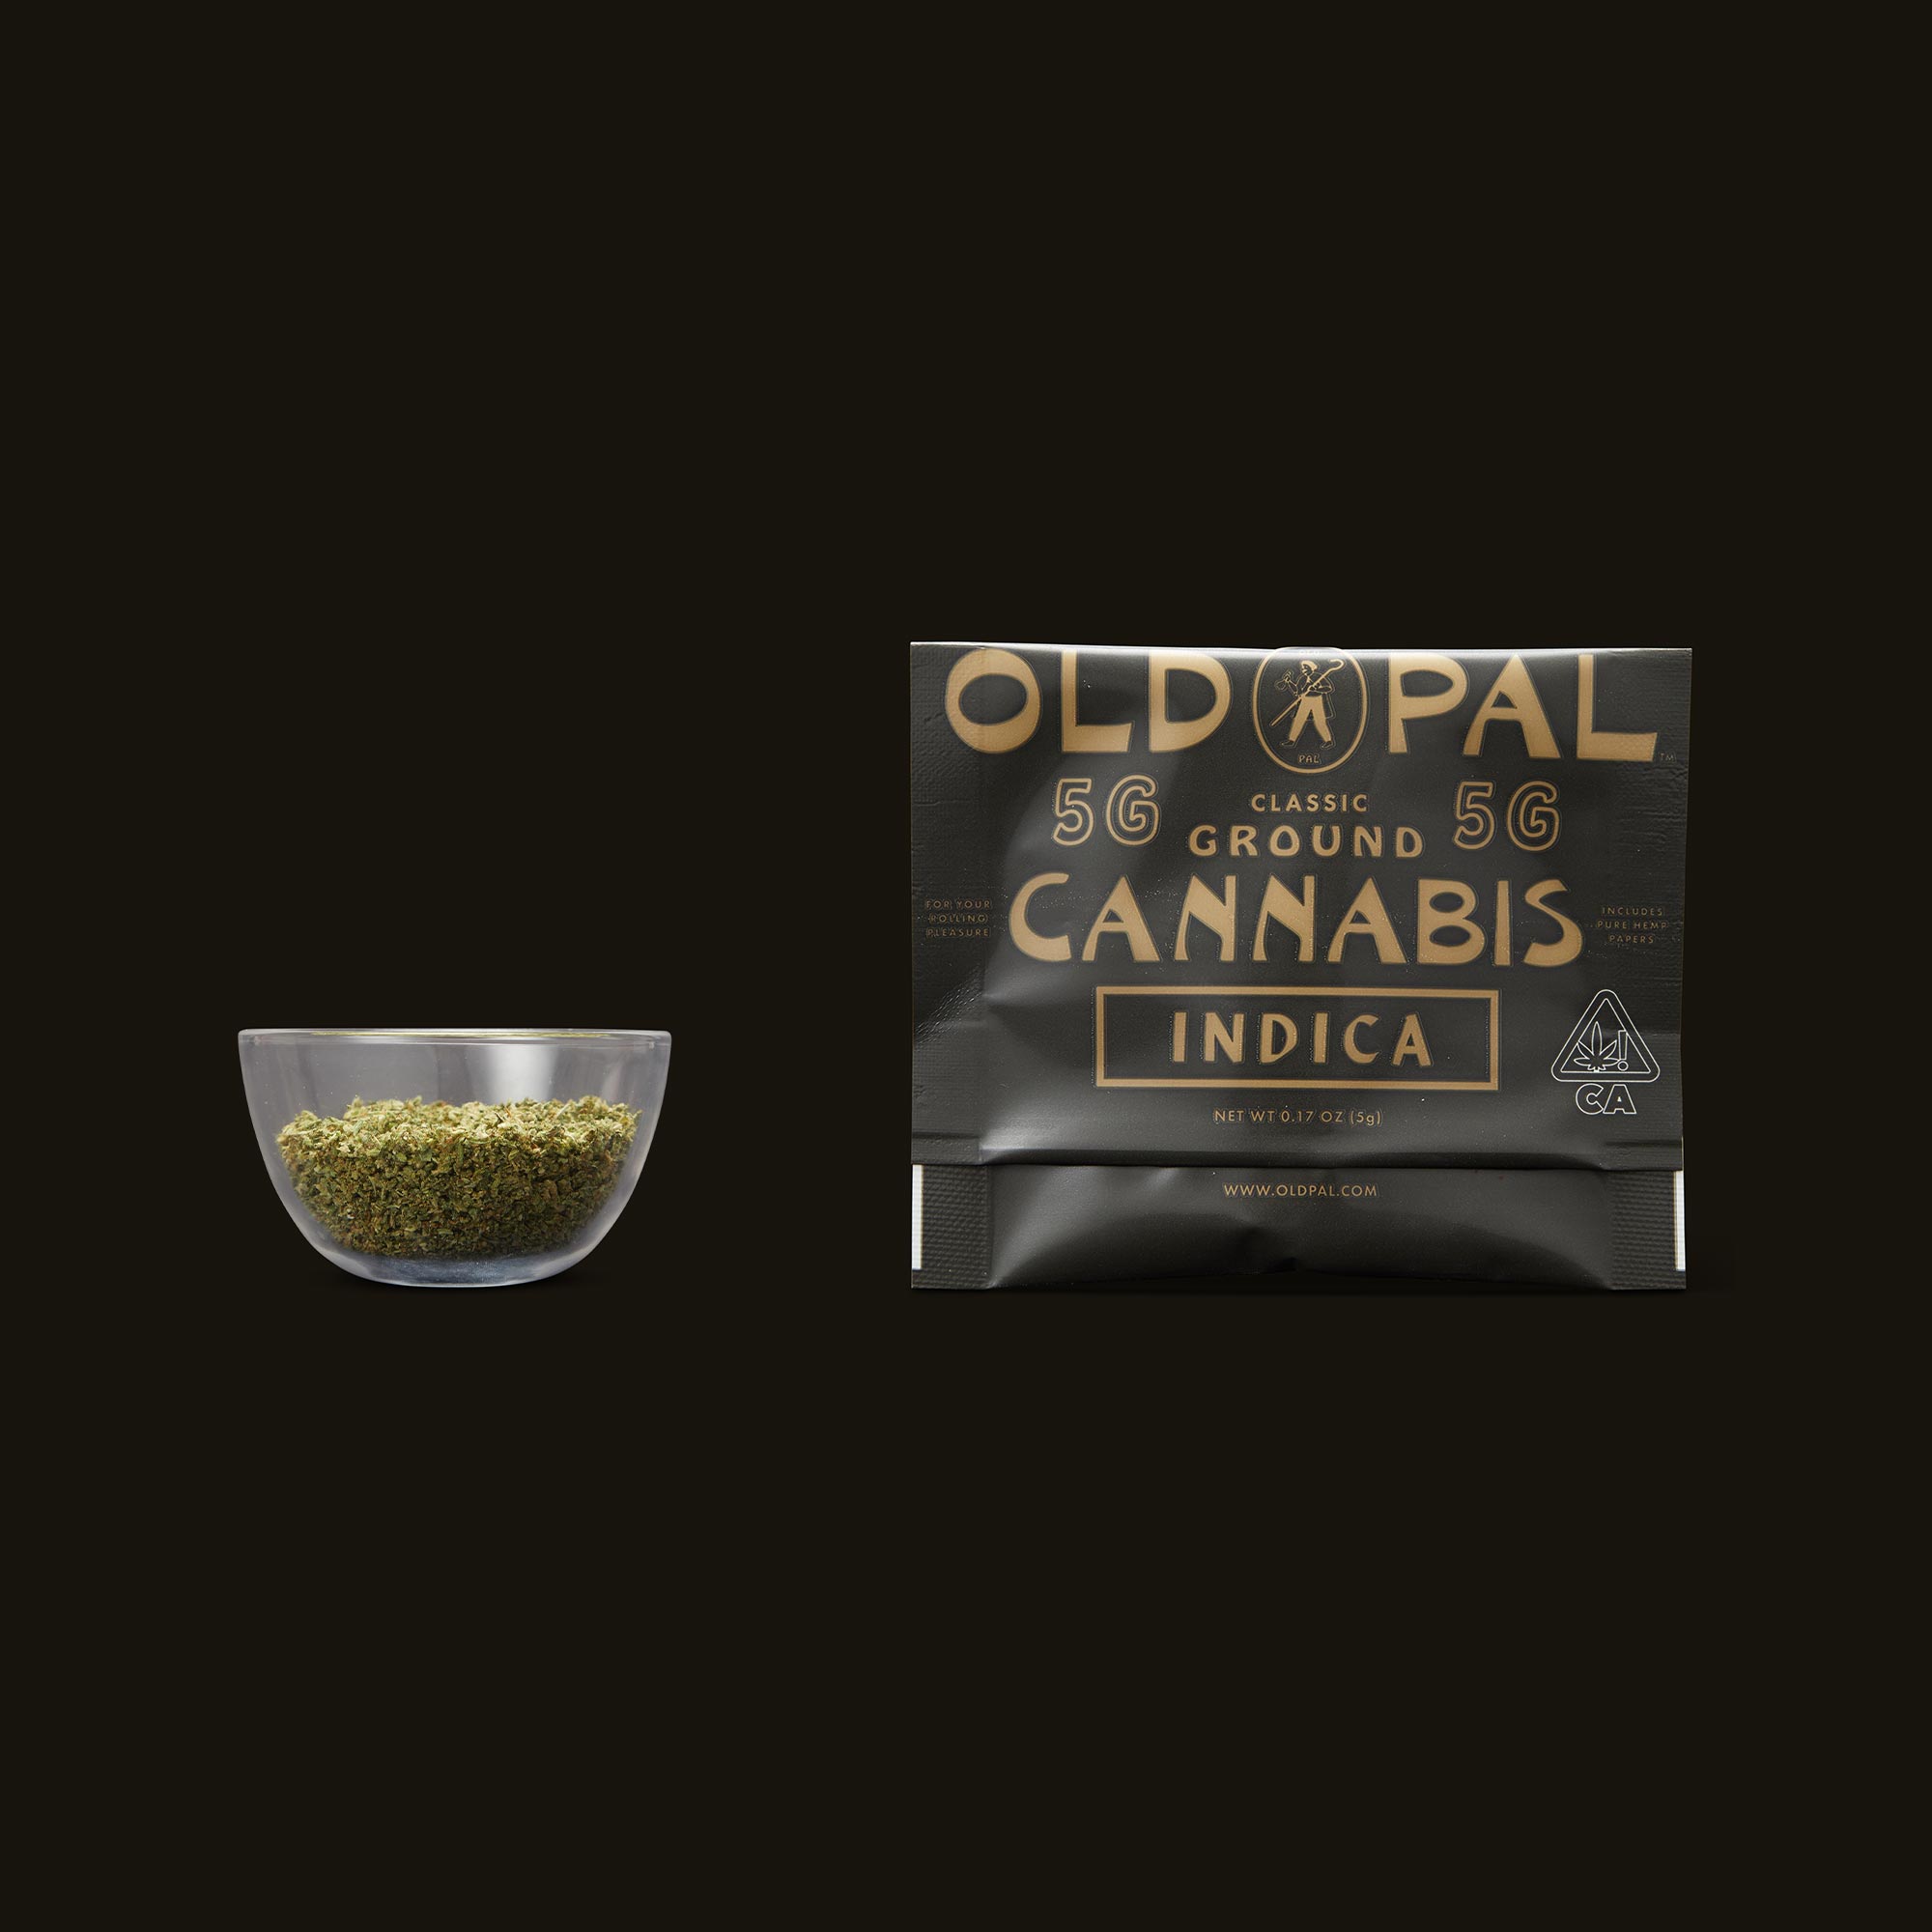 Old-Pal-Ready-to-Roll-Indica-5g4537-1853626.jpg